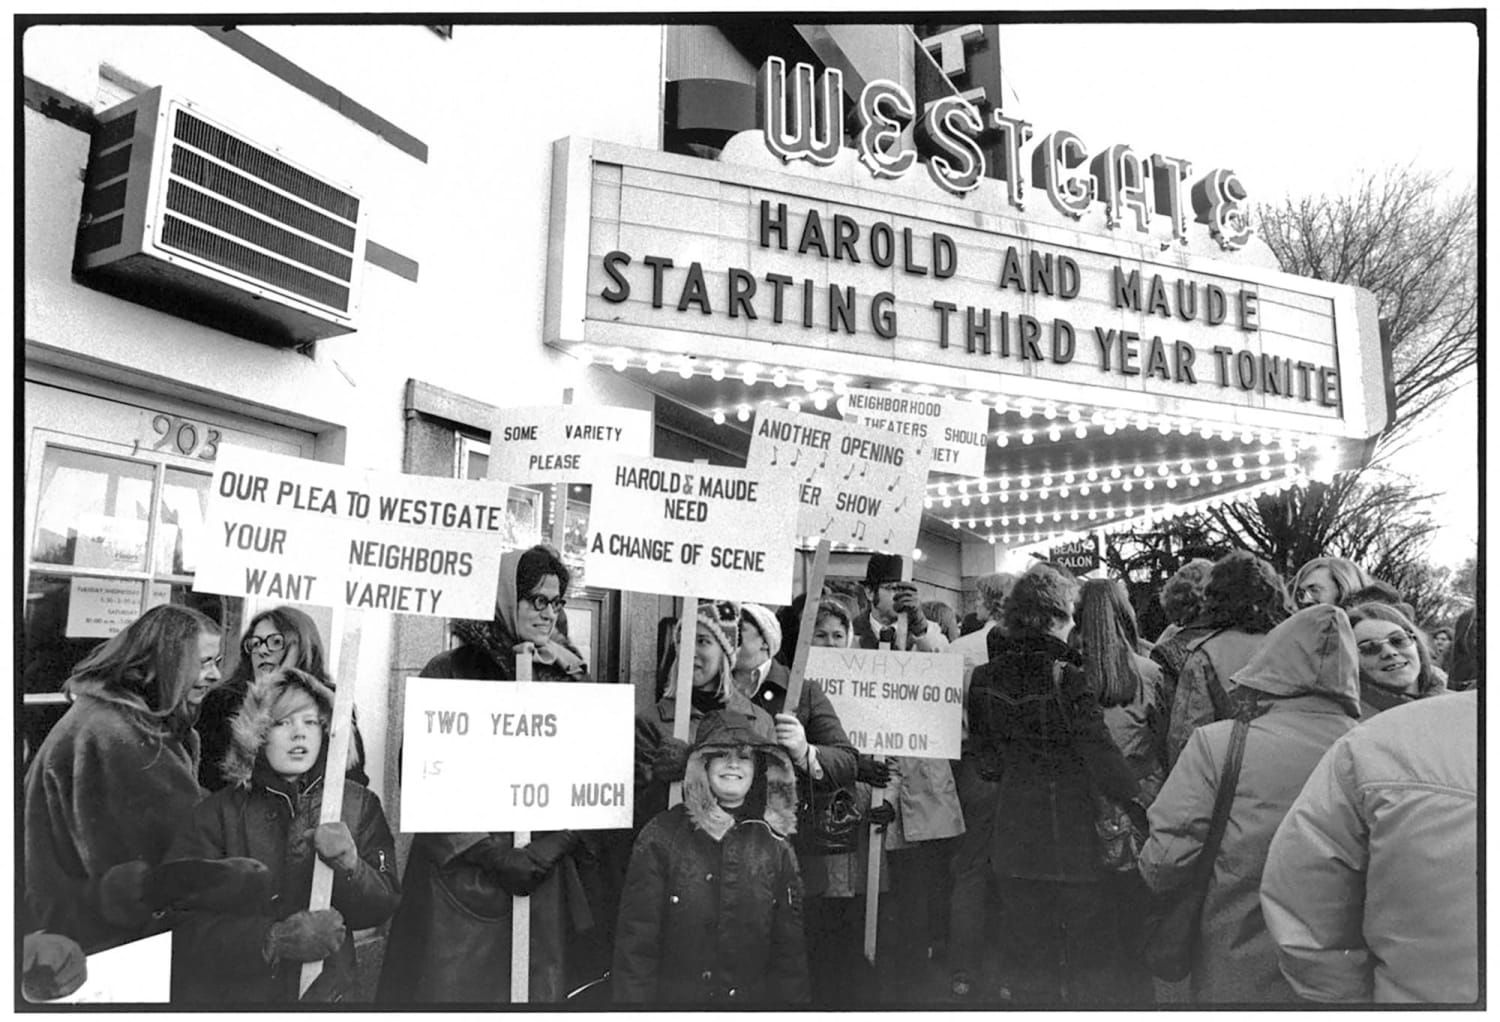 Protest at the Westgate Theatre in Edina, Minnesota, 104-weeks into the theatre’s 114-week run of Harold and Maude, March 20, 1974.